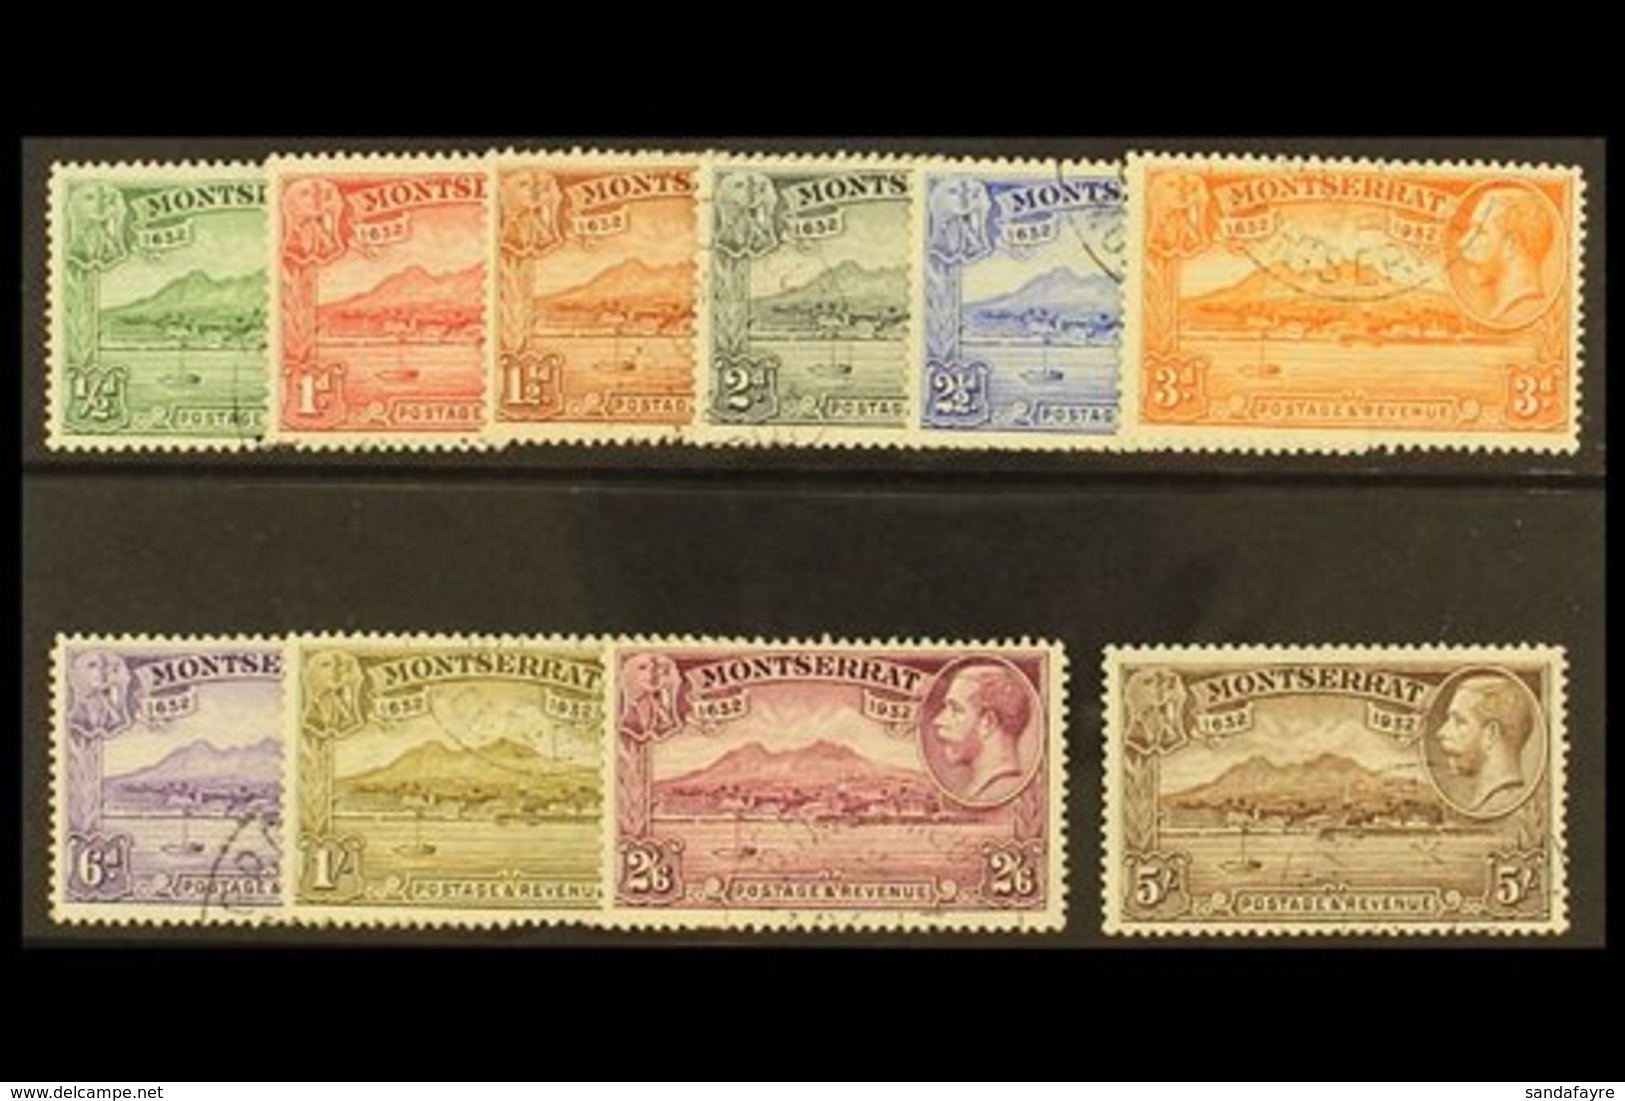 1932  300th Anniv. Of Settlement Set Complete, SG 84/93, Each Cancelled By MADAME JOSEPH Forged Plymouth Cds Of 13th May - Montserrat